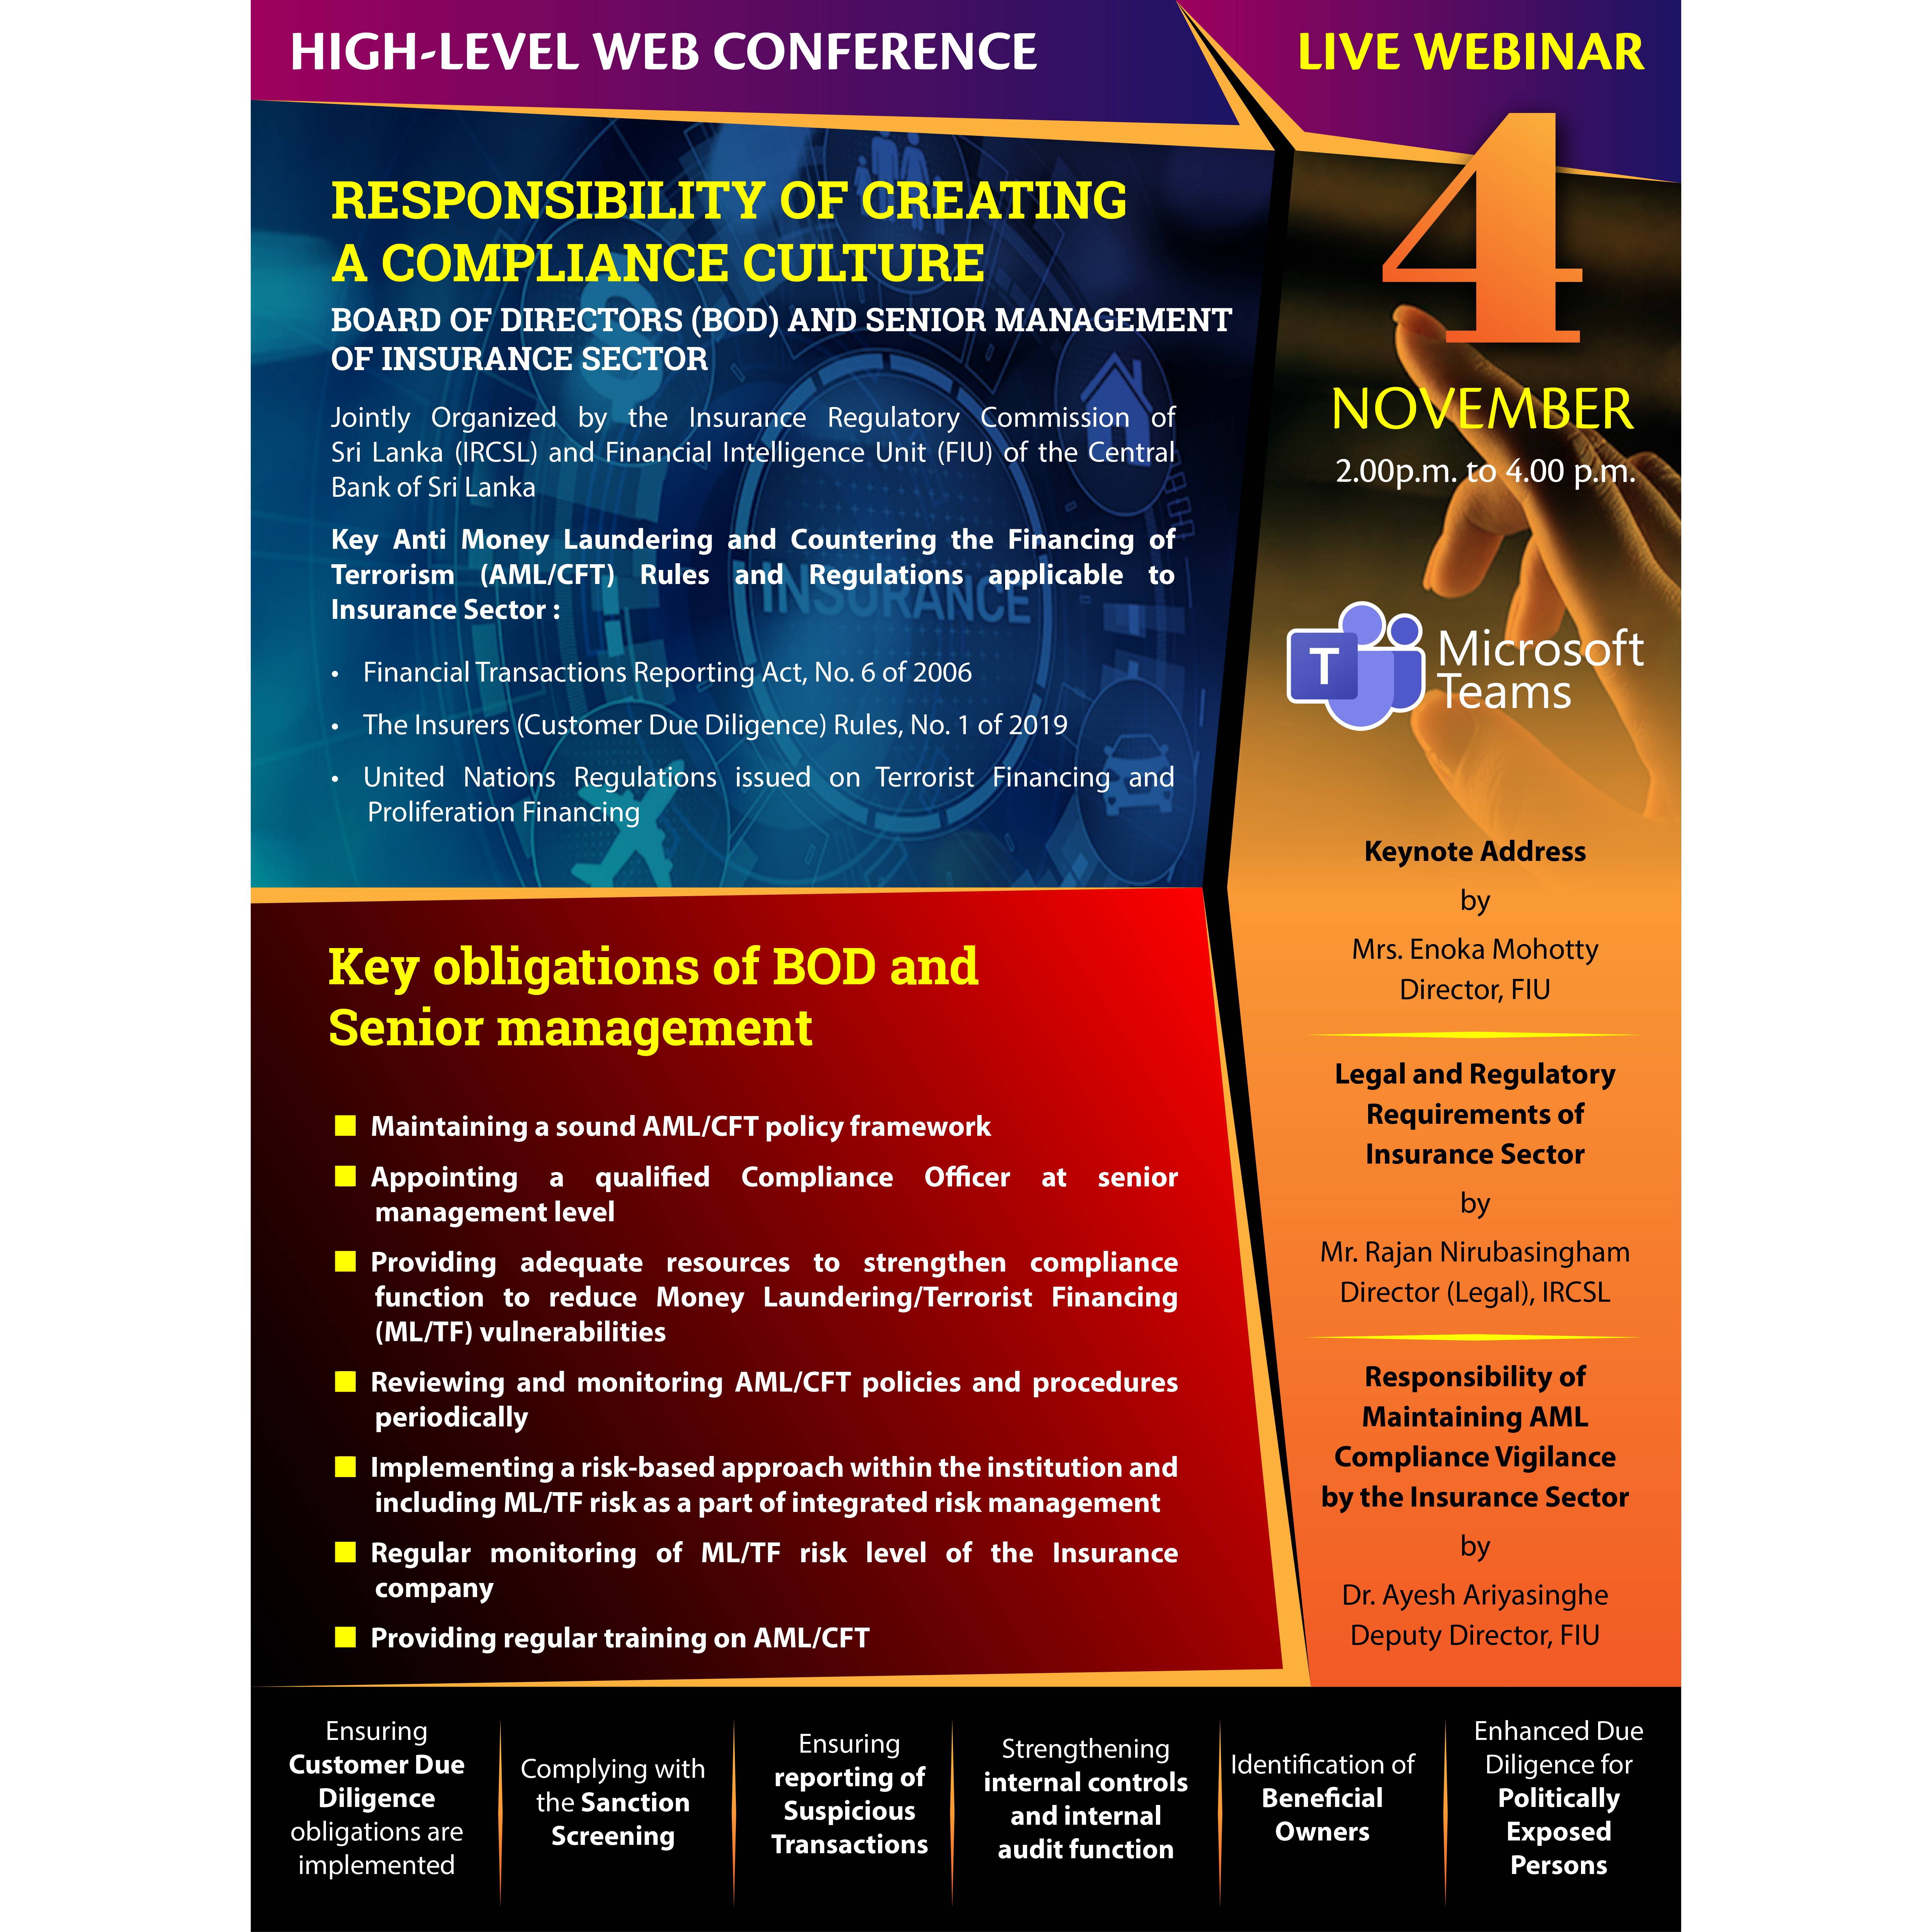 Web Conference for Insurance Sector